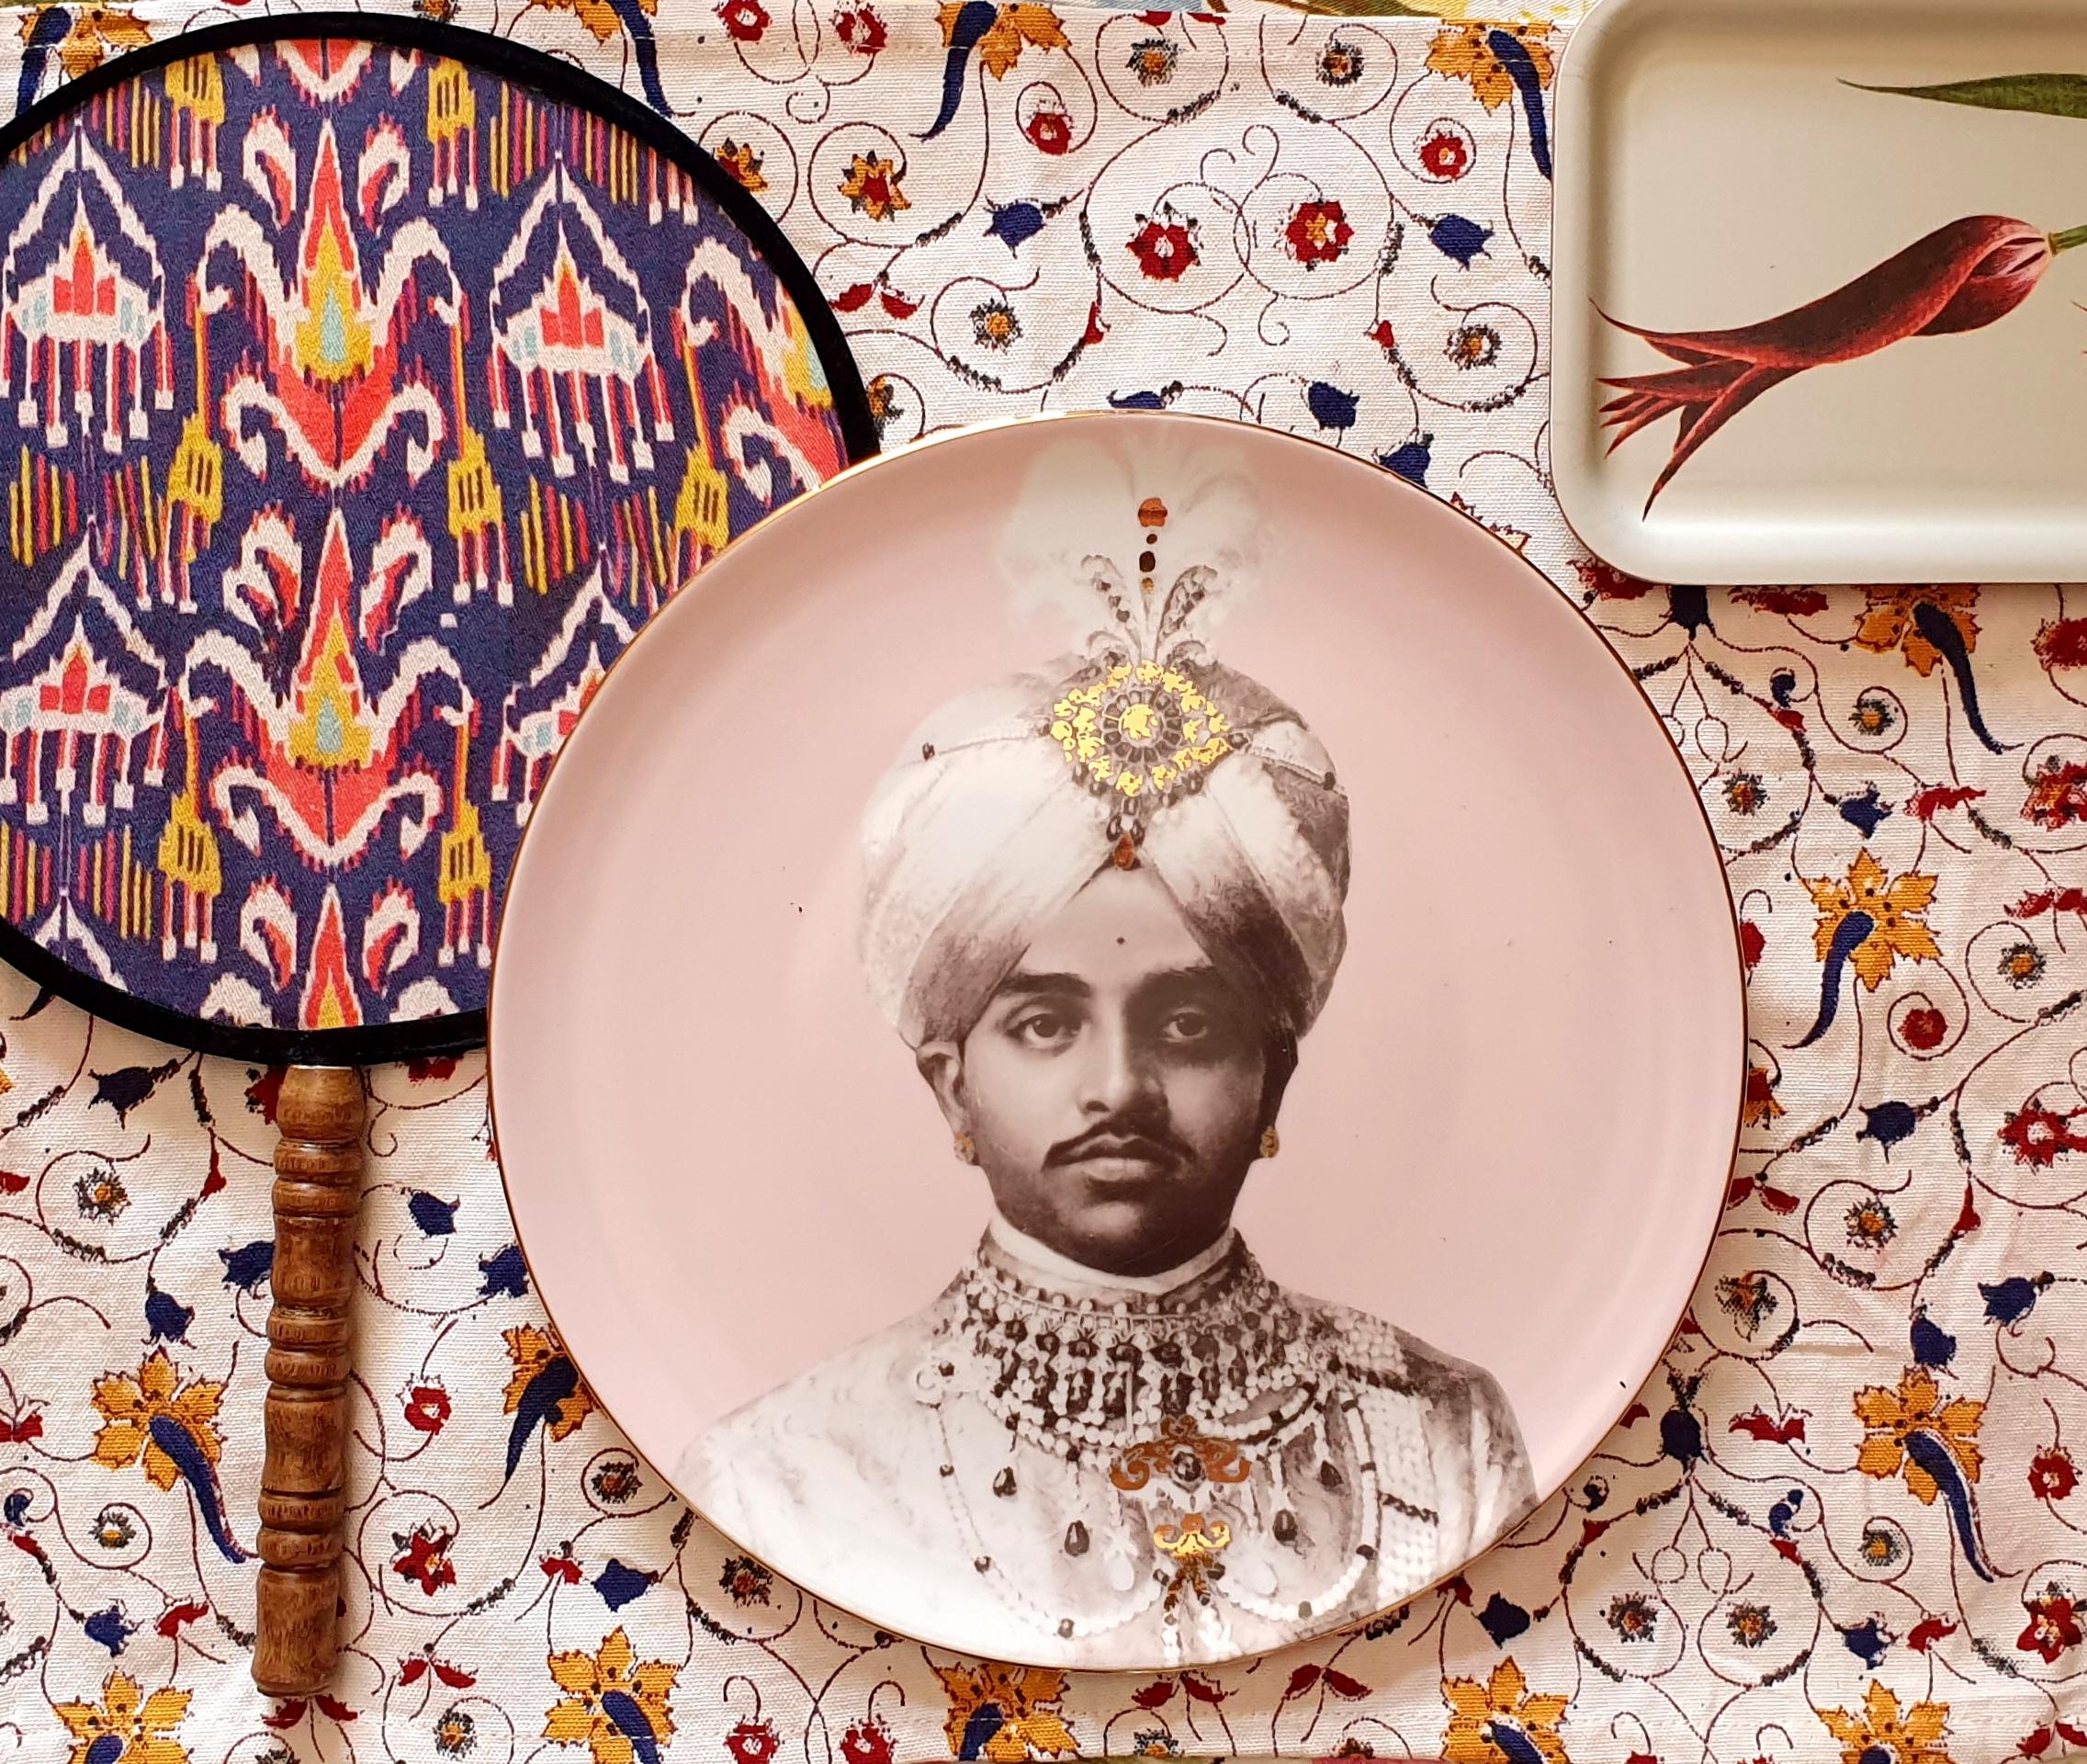 'The Silk Road' is a project that gives hommage to this legendary route that during centuries has meant exositism and travels. These line of porcelain dinner plate dedicated to India is the first part of this project and brings to us the portraits